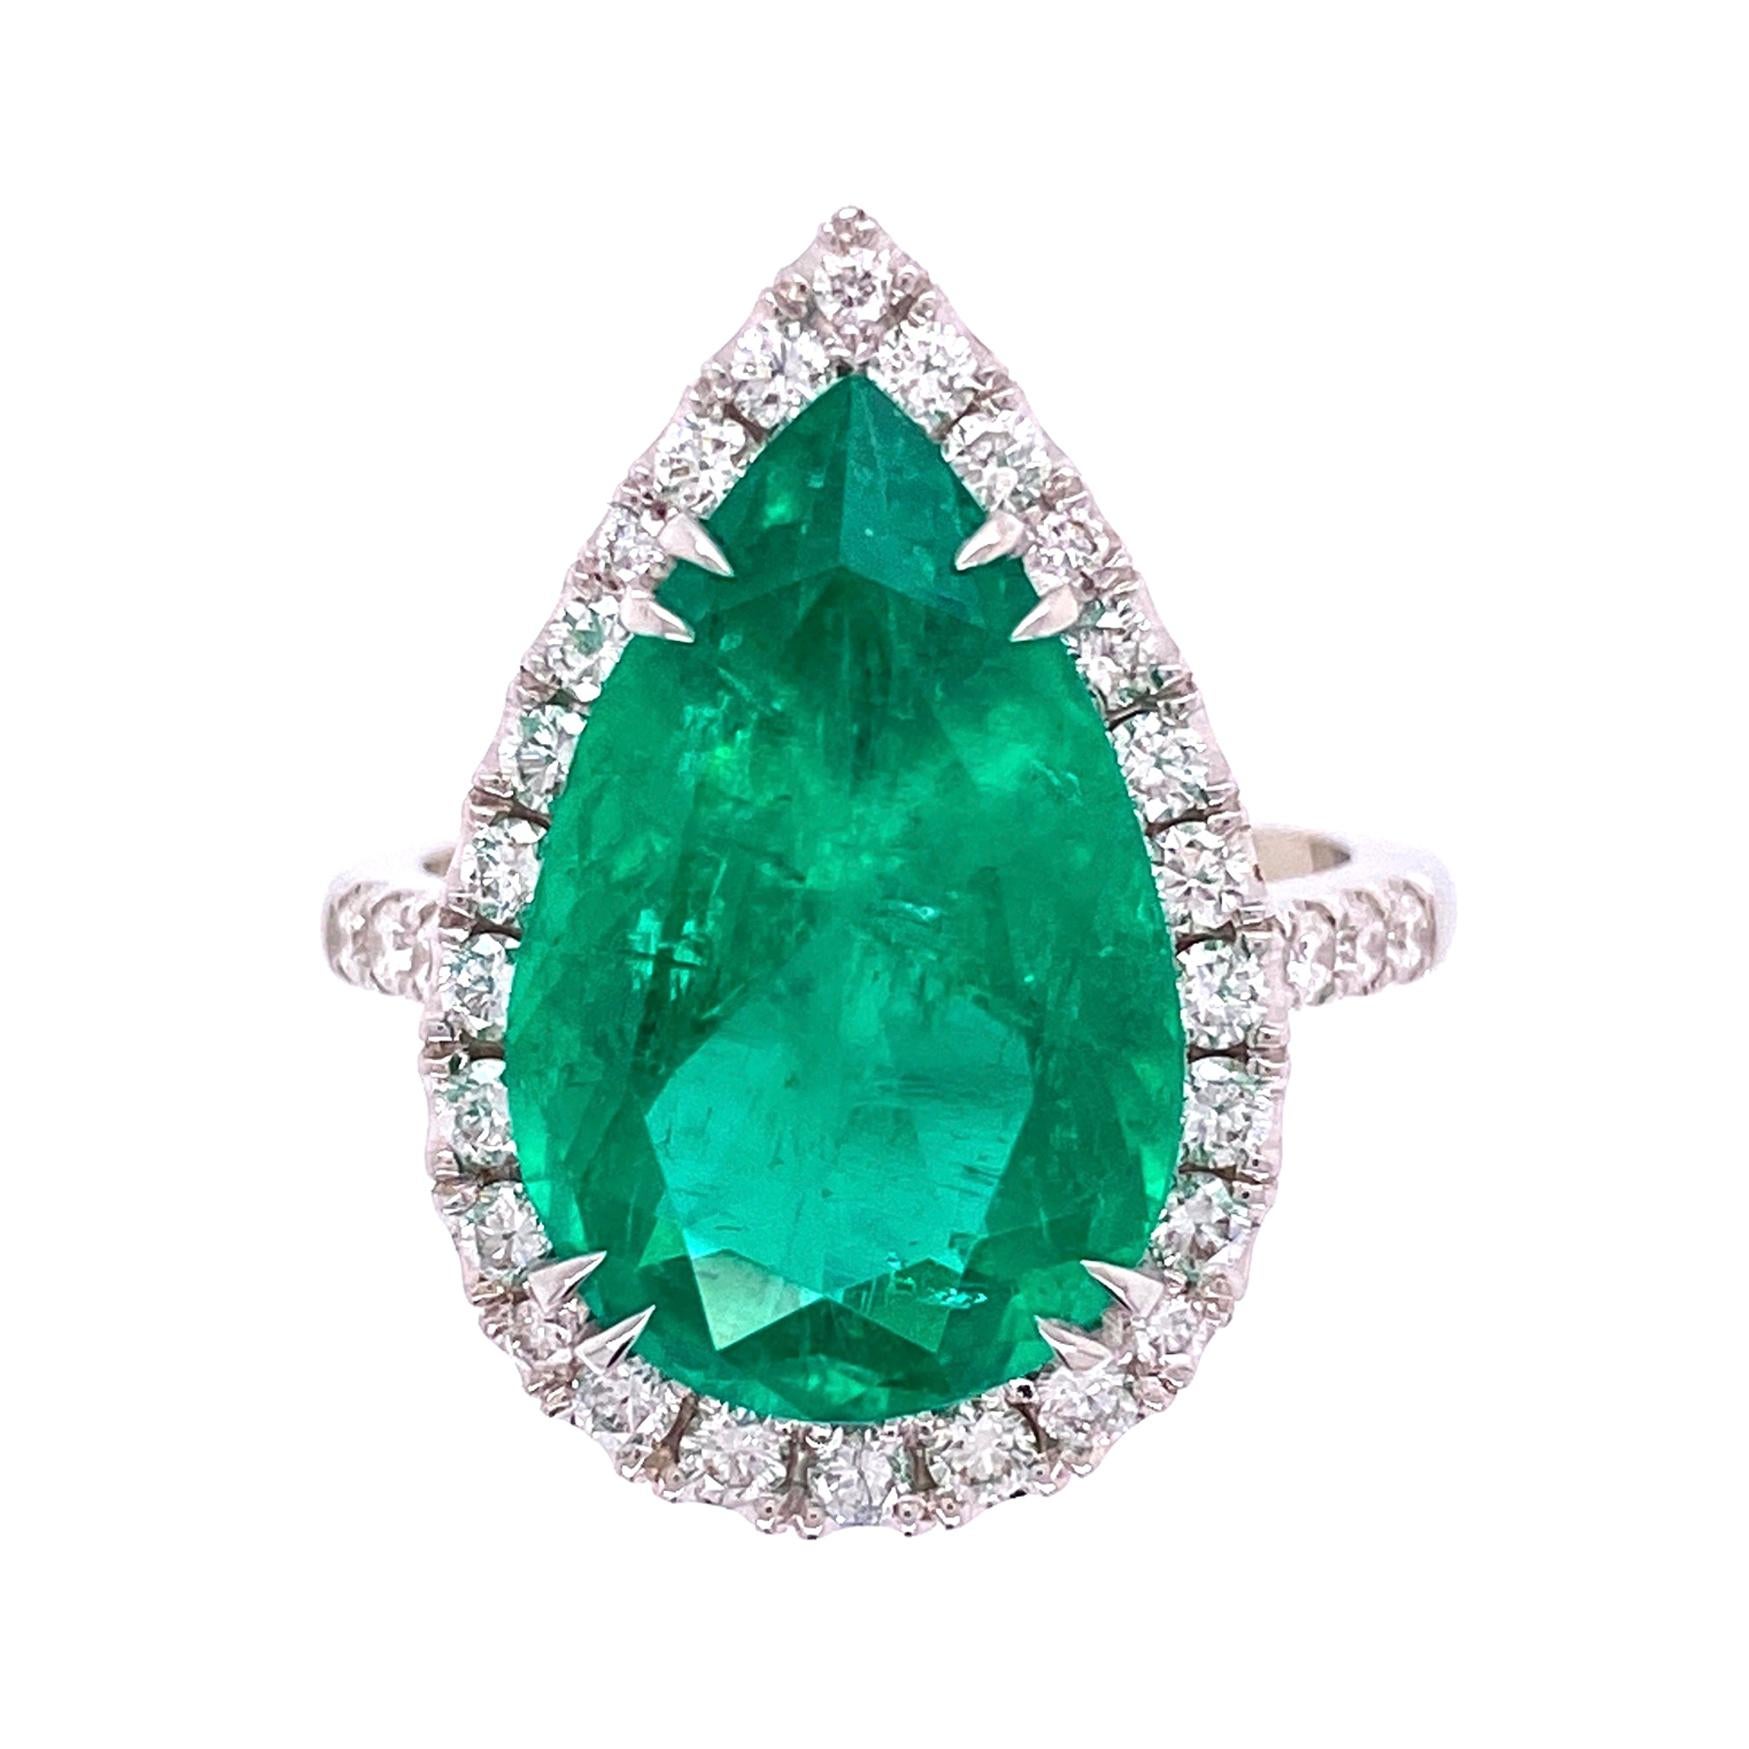 6.96 Carat Pear Shaped Emerald and Diamond Ring Estate Fine Jewelry For Sale